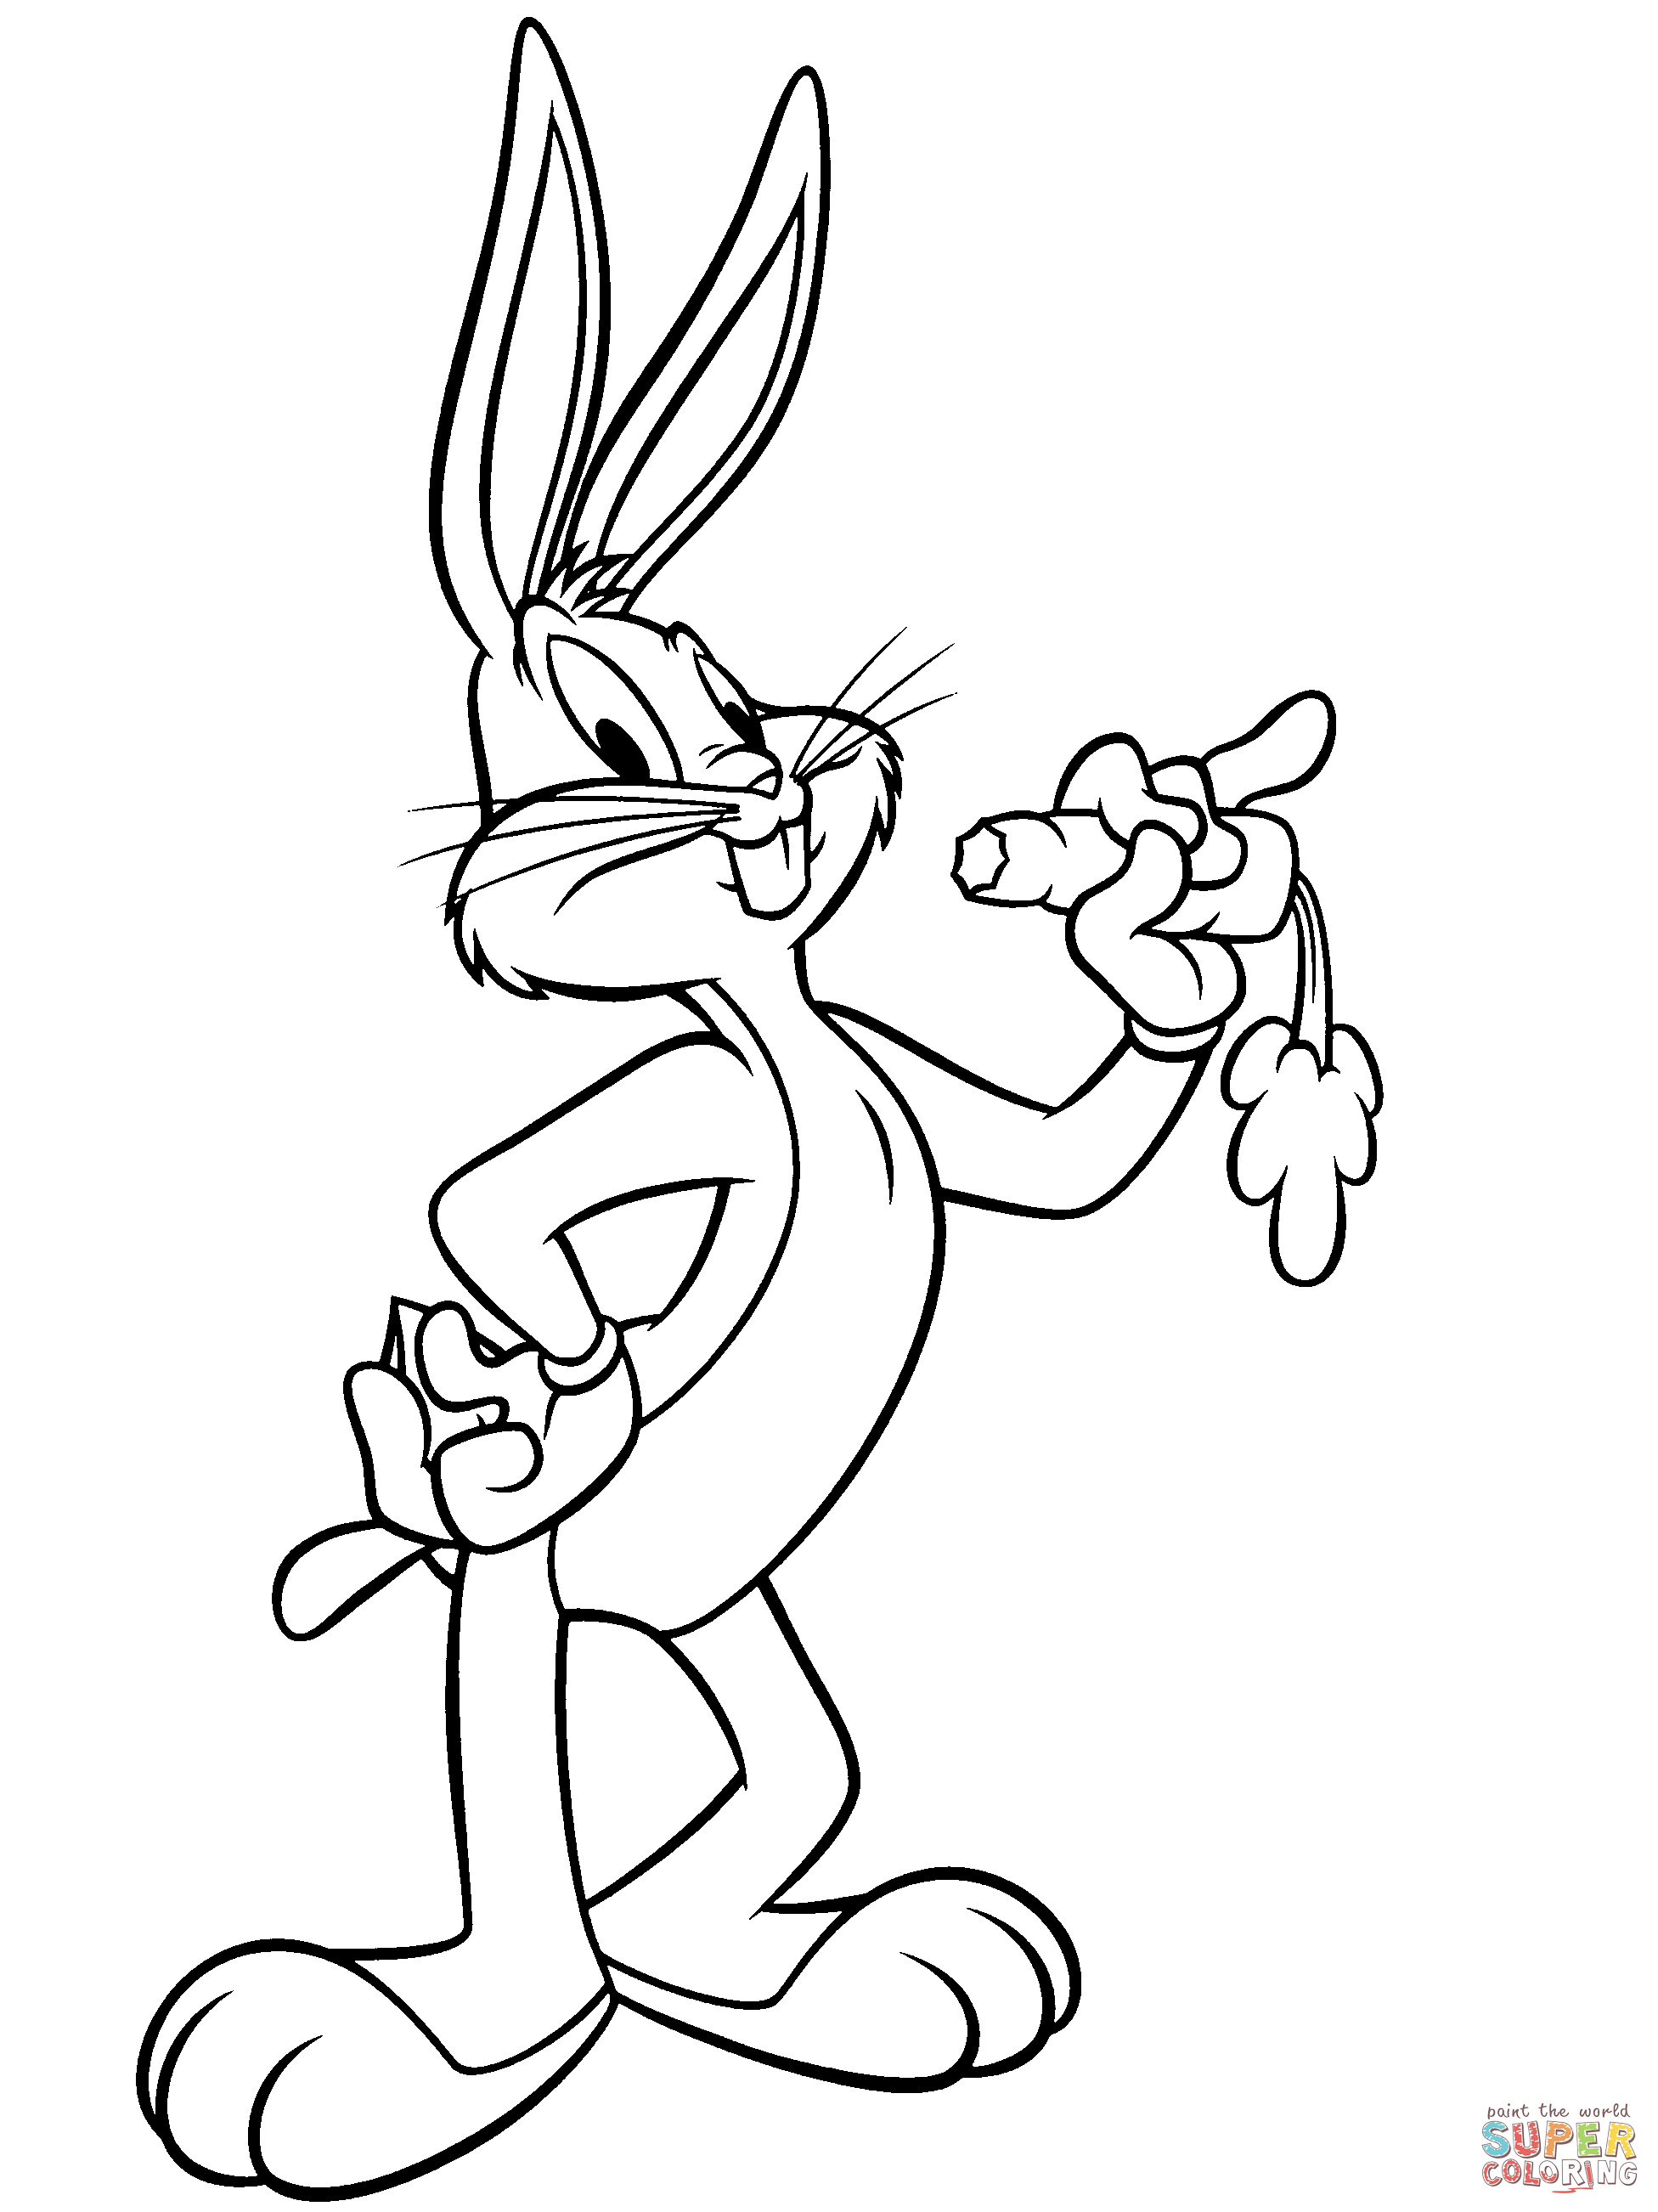 Bugs Bunny Coloring Page | Free Printable Coloring Pages - Free Printable Bunny Pictures